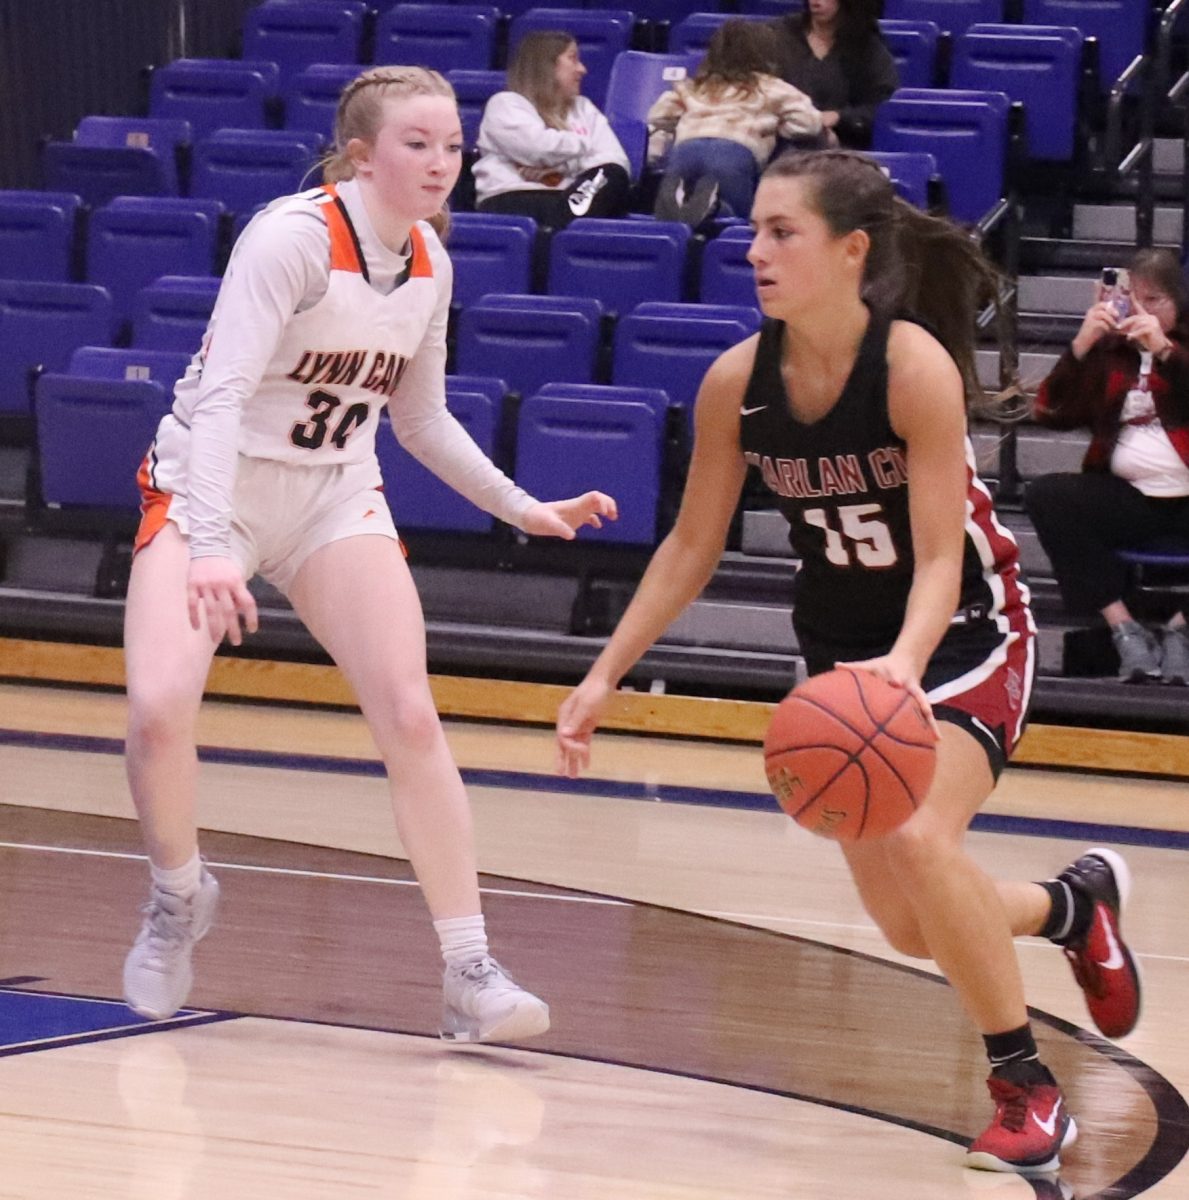 Senior guard Ella Karst scored 22 points on Friday in the Lady Bears 68-23 win over Lynn Camp.